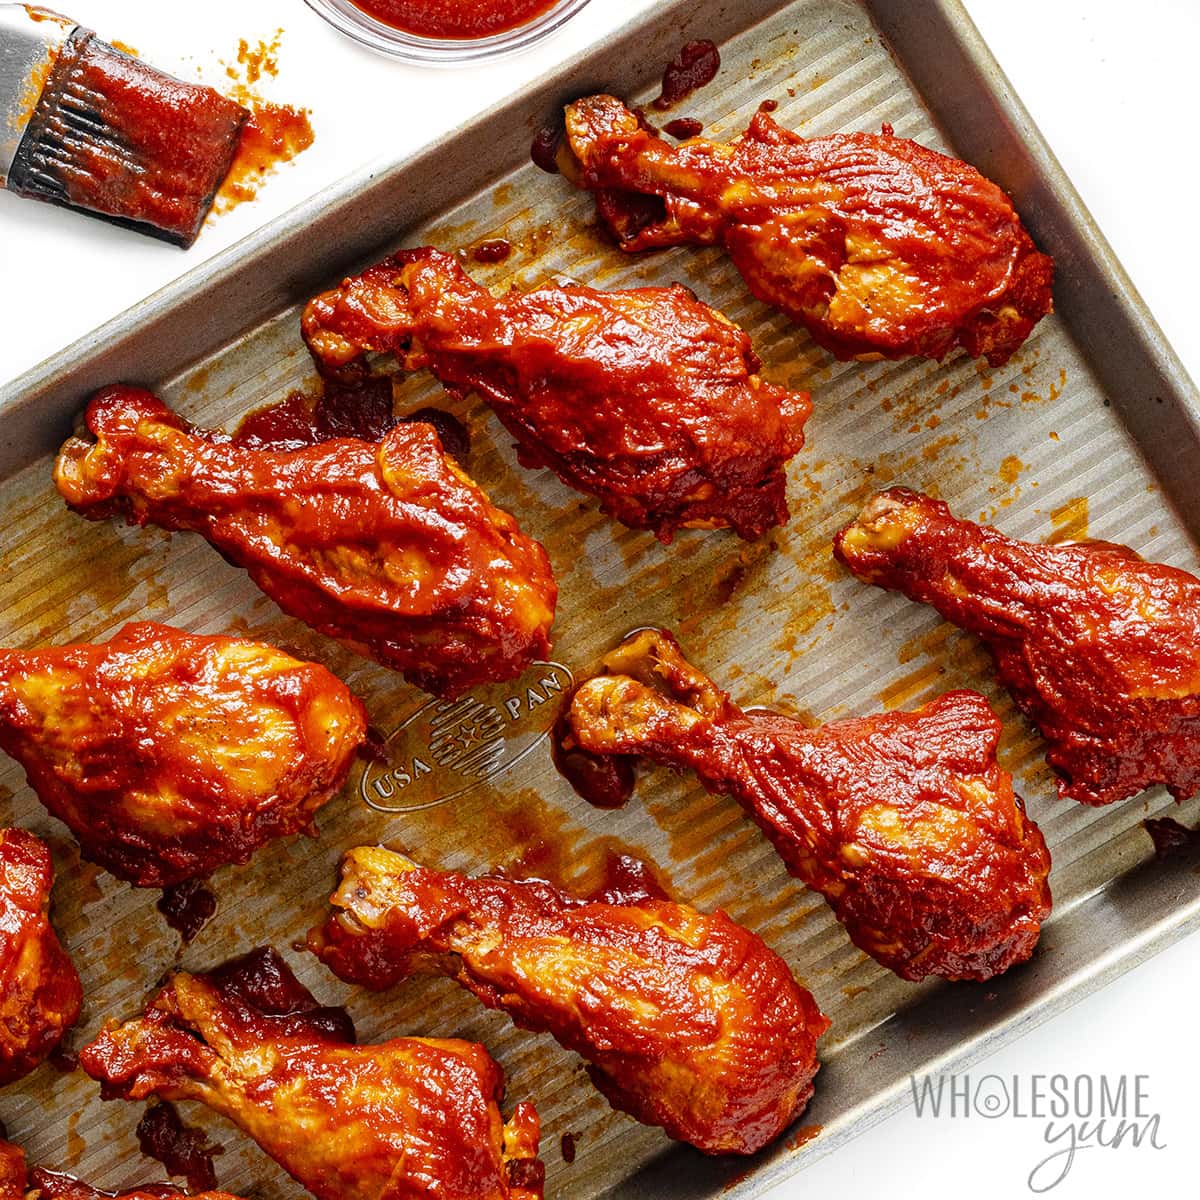 Chicken drumsticks brushed with more BBQ sauce.